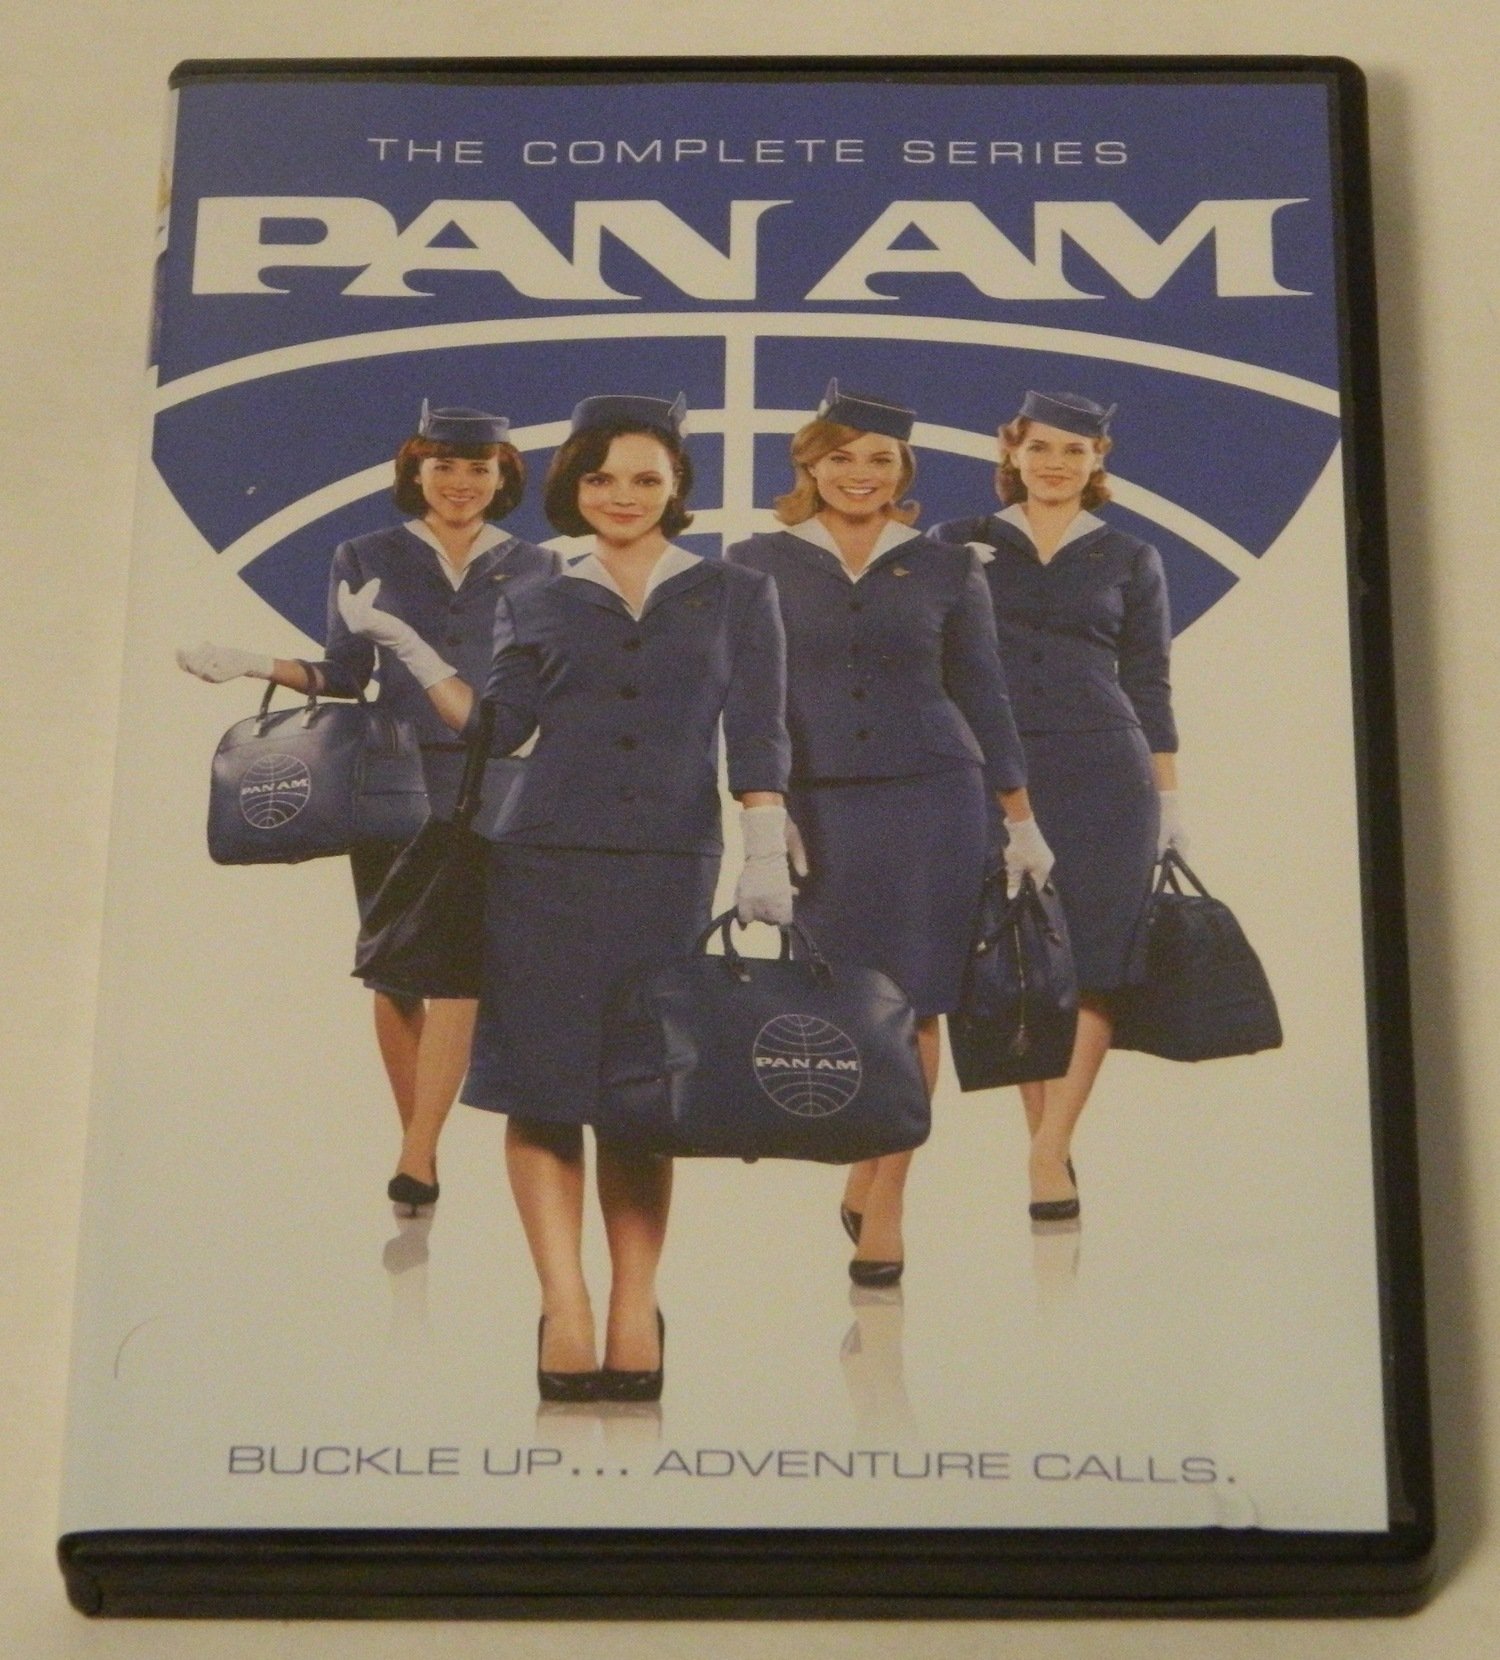 Pan Am: The Complete Series DVD Review